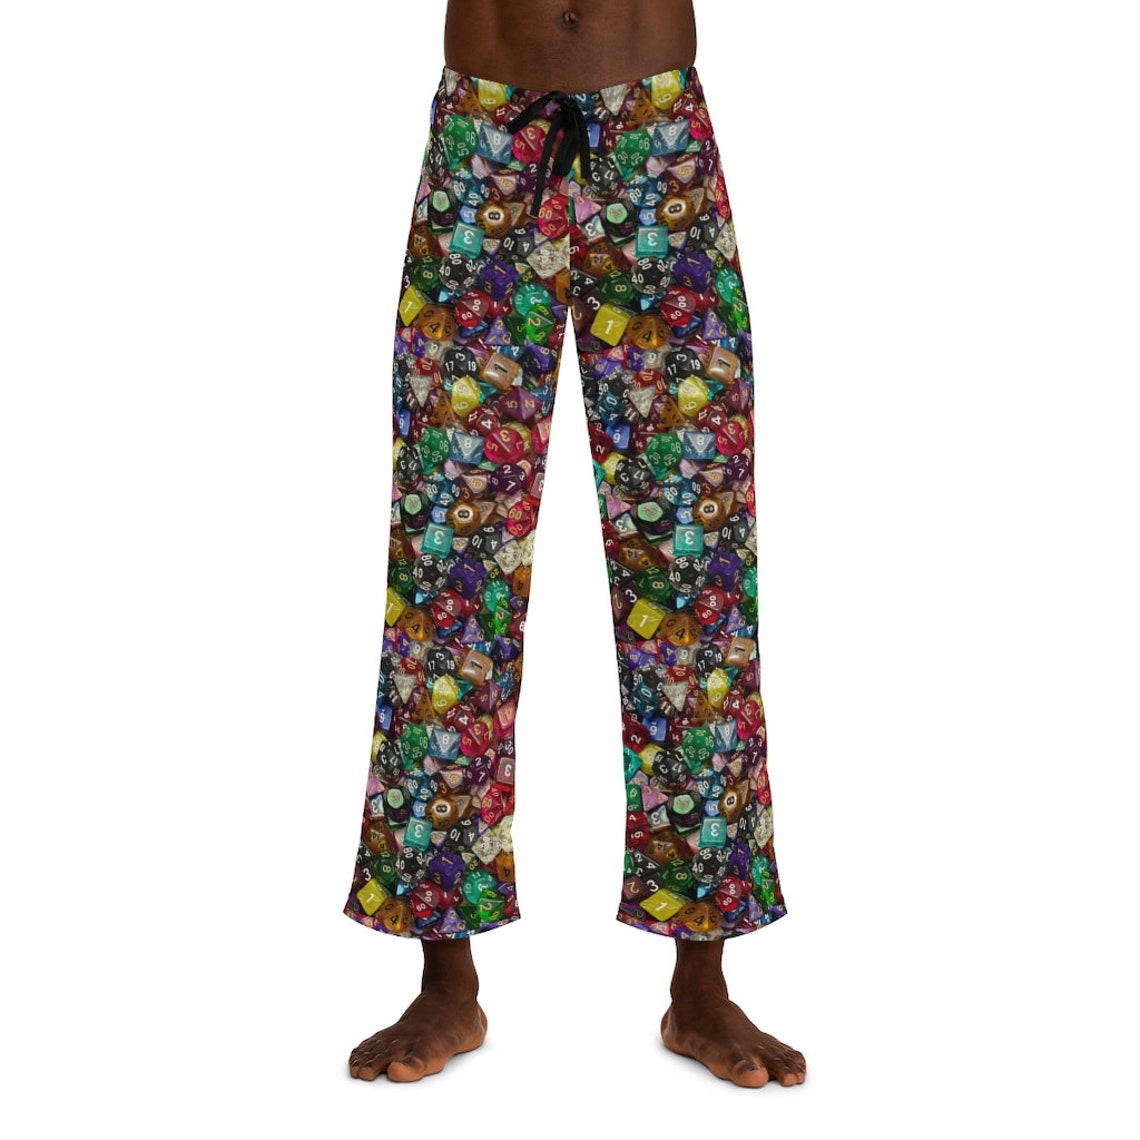 D&D Dice Men's Pajama Pants Dnd Dungeons and Dragons - Etsy